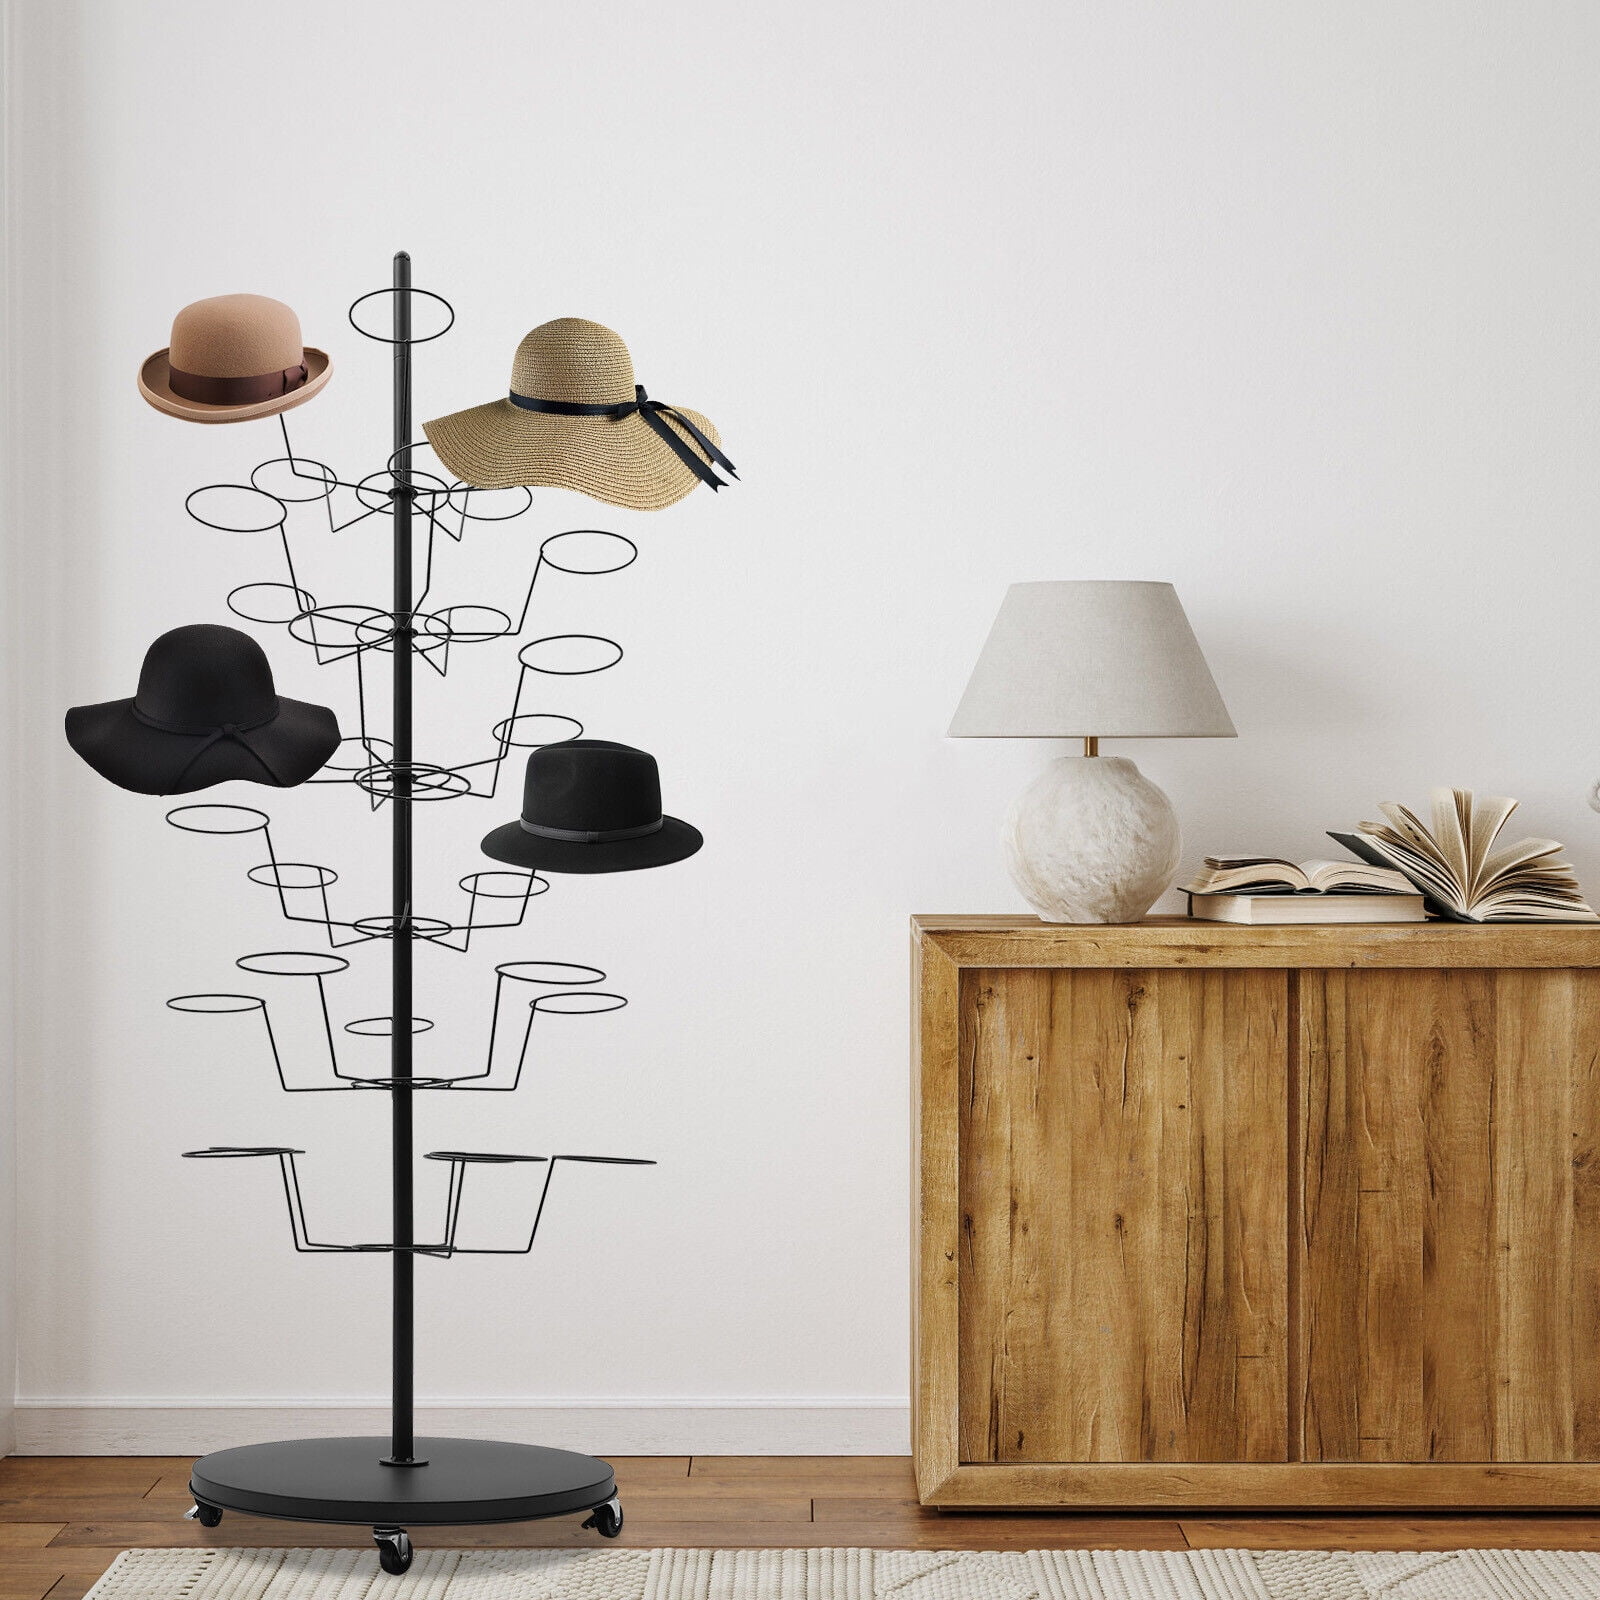 FETCOI 6 Layers Metal Hat Display Rack 30 Hats Cap Rotating Storage Stand  w/Wheels